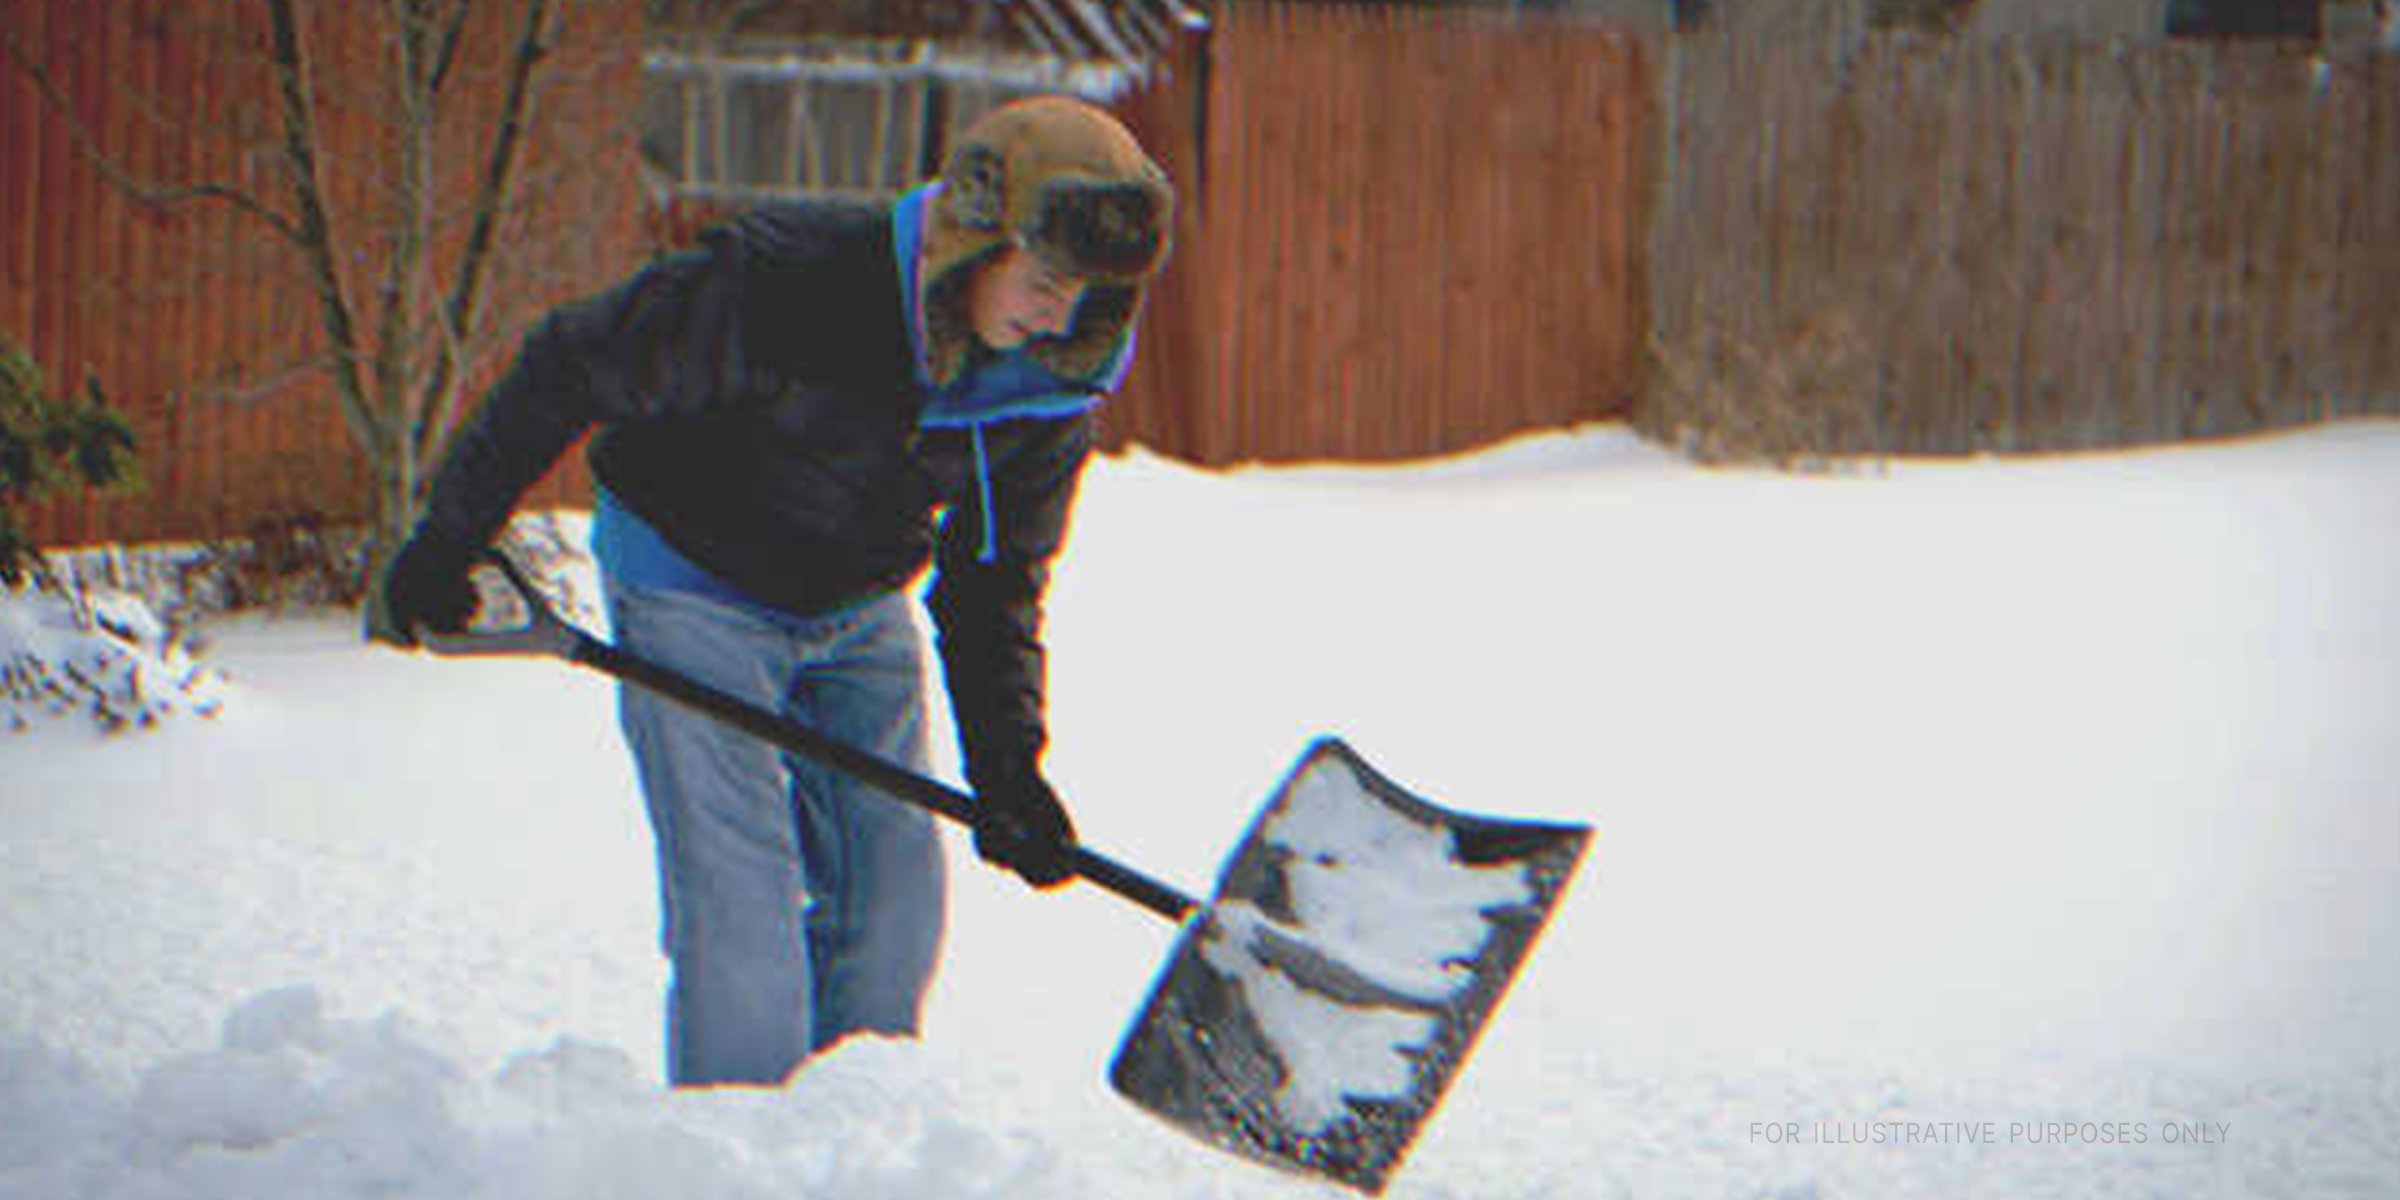 Boy Clearing Snow. | Source: Shutterstock